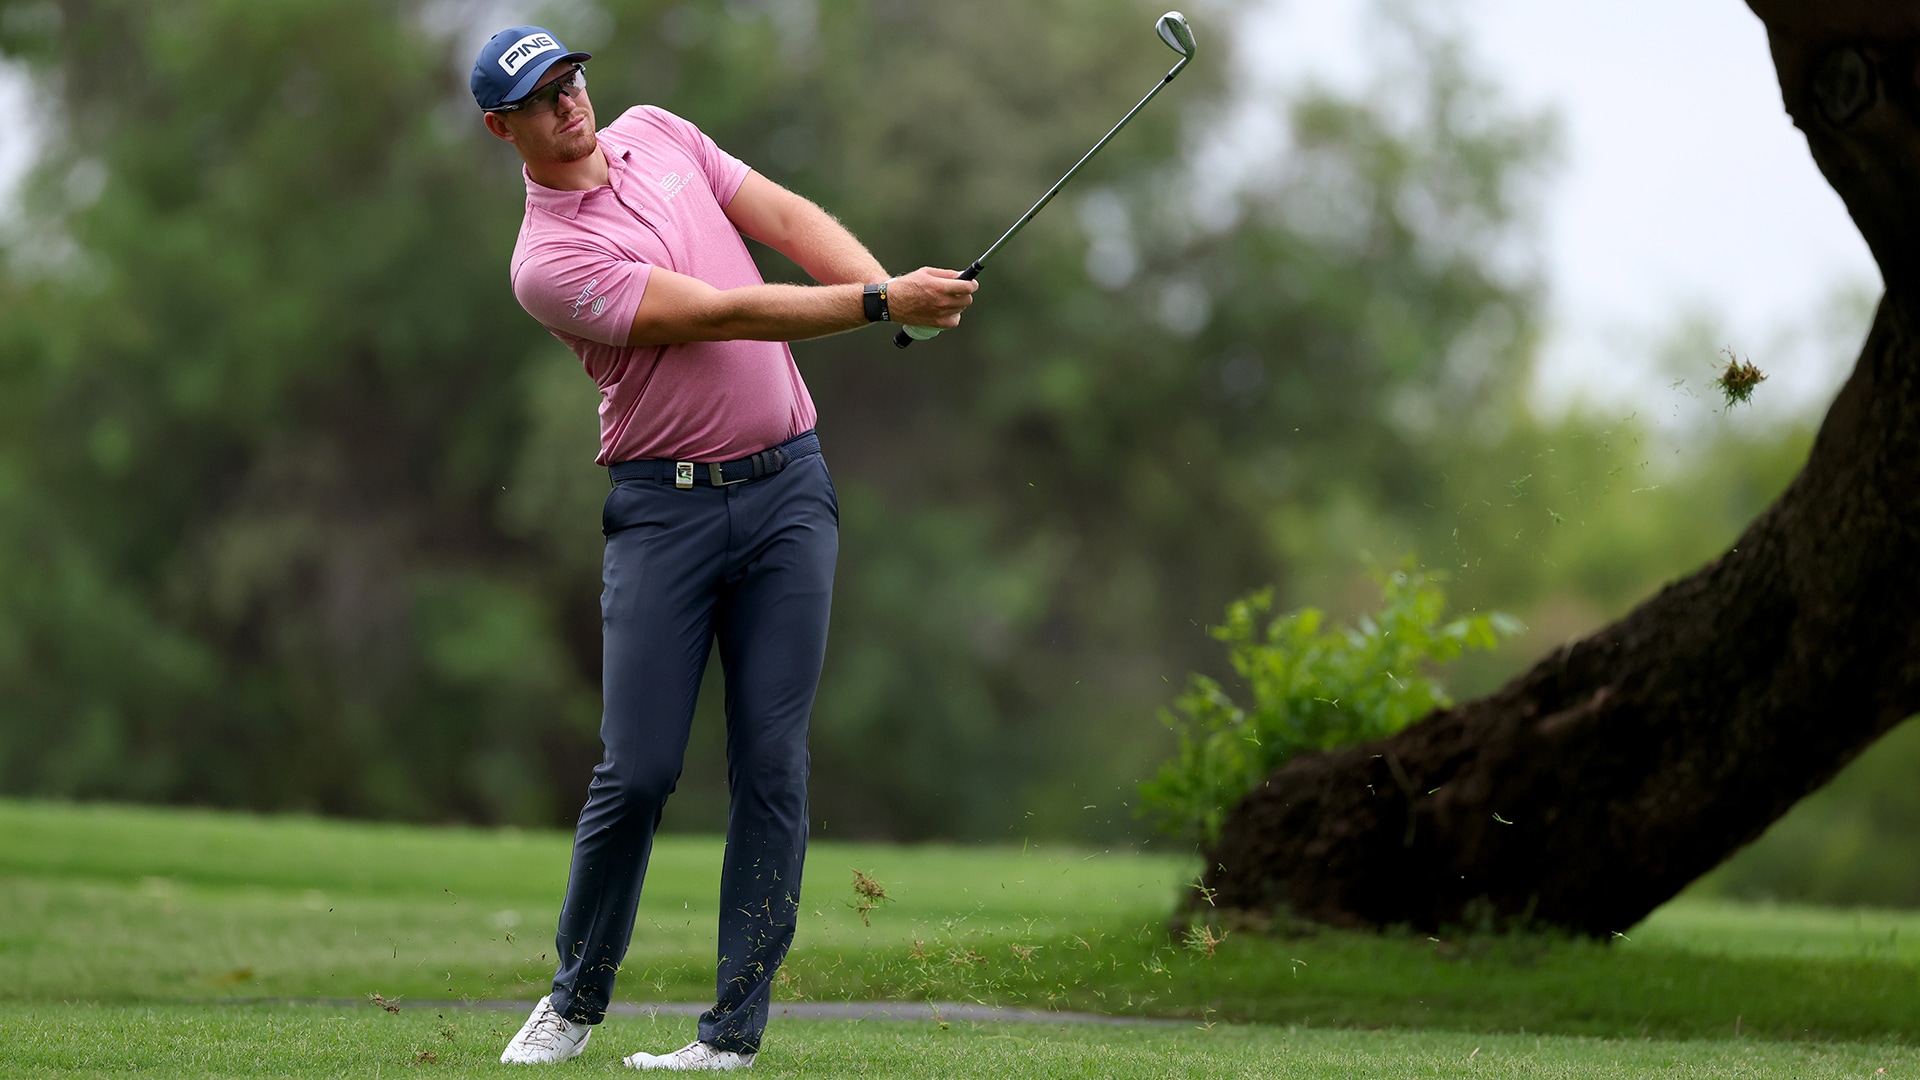 This golfer is 6’10 with Kyle Berkshire swing speed – and he’s playing American Express